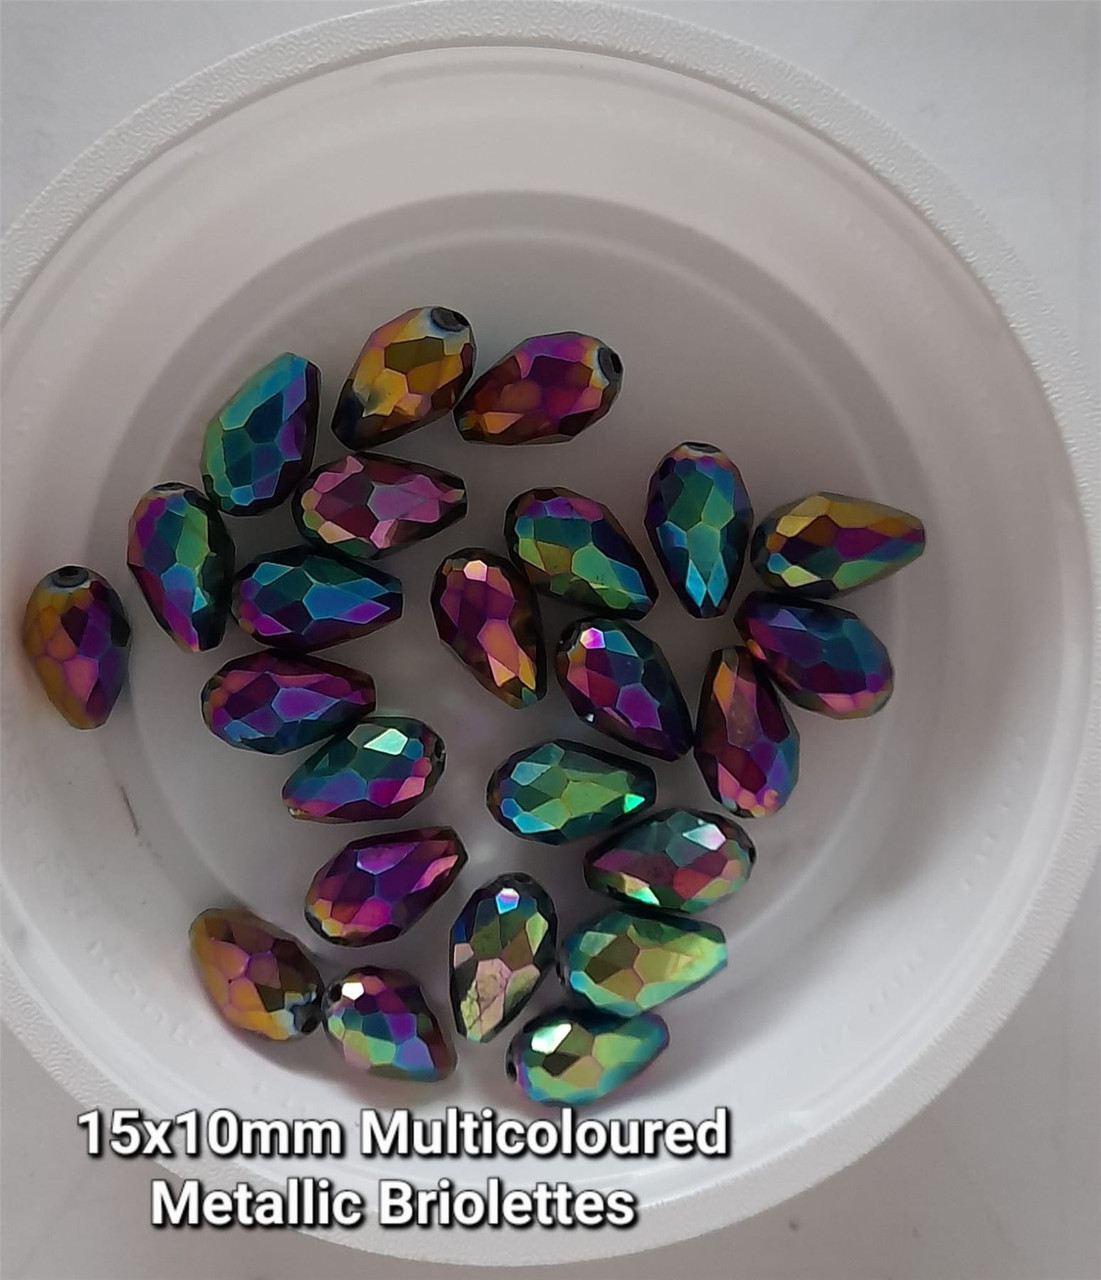 15mm x 10mm glass faceted tear drop beads (briolettes) pack of 24 beads - MULTICOLOUR METALLIC